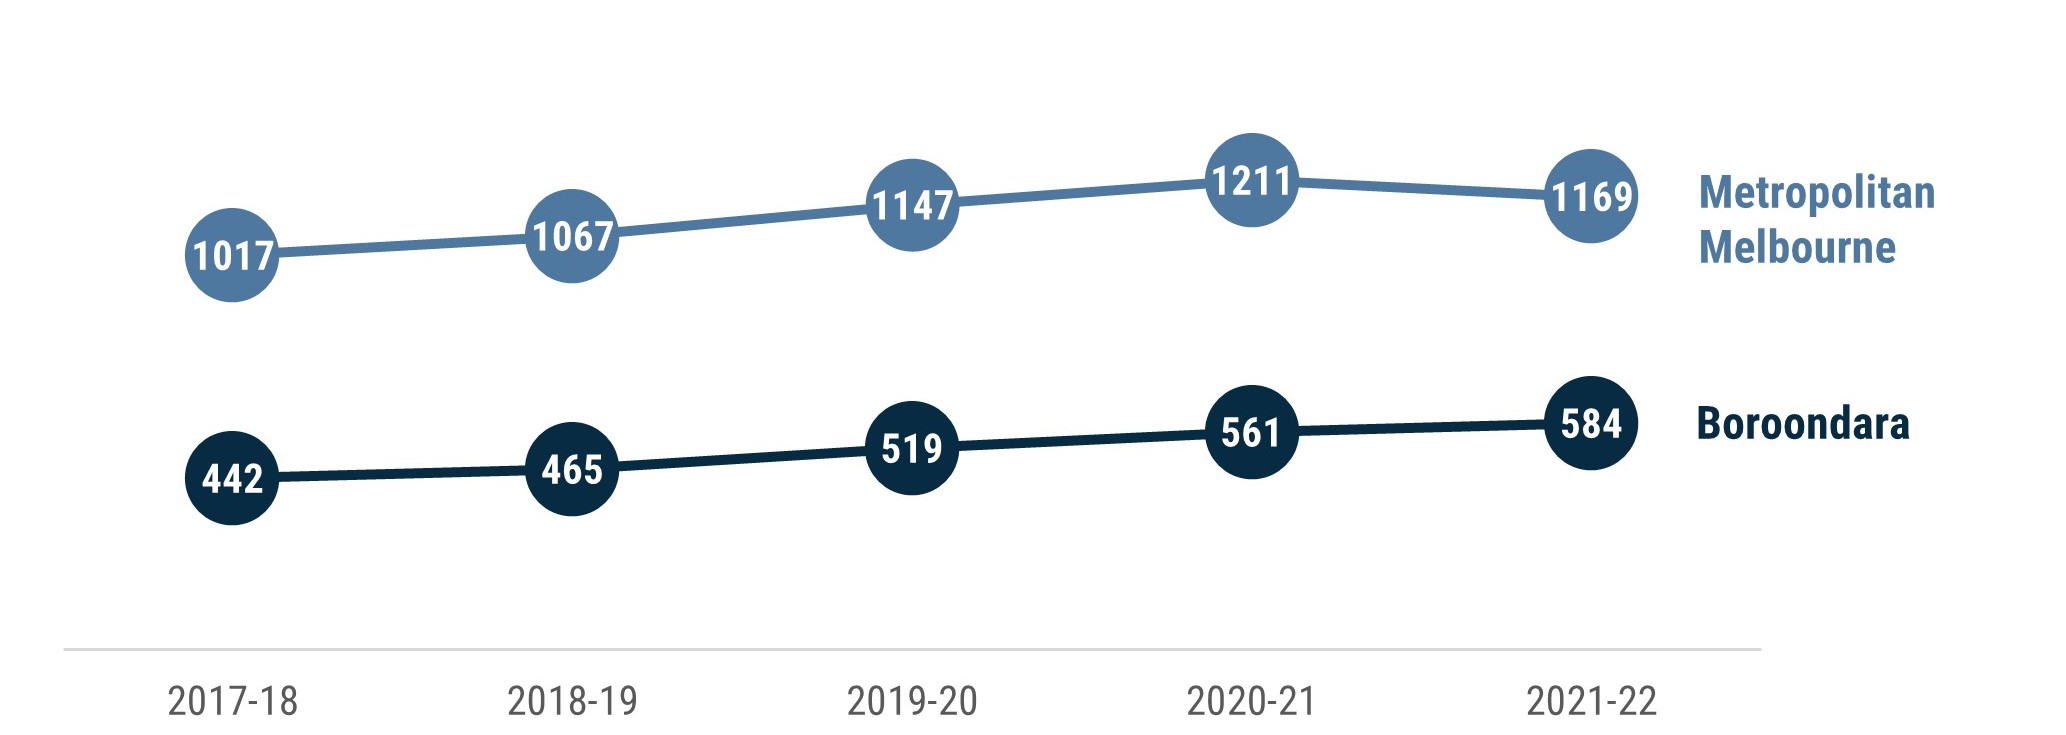 Line chart which shows that the rate of recorded family violence incidents in Boroondara per 100,000 population has risen from 442 in 2017-18 to 584 in 2021-22. The metropolitan Melbourne rate rose from 1017 in 2017-18 to a peak of 1211 in 2020-21 before dropping sightly to 1169 in 2021-22.